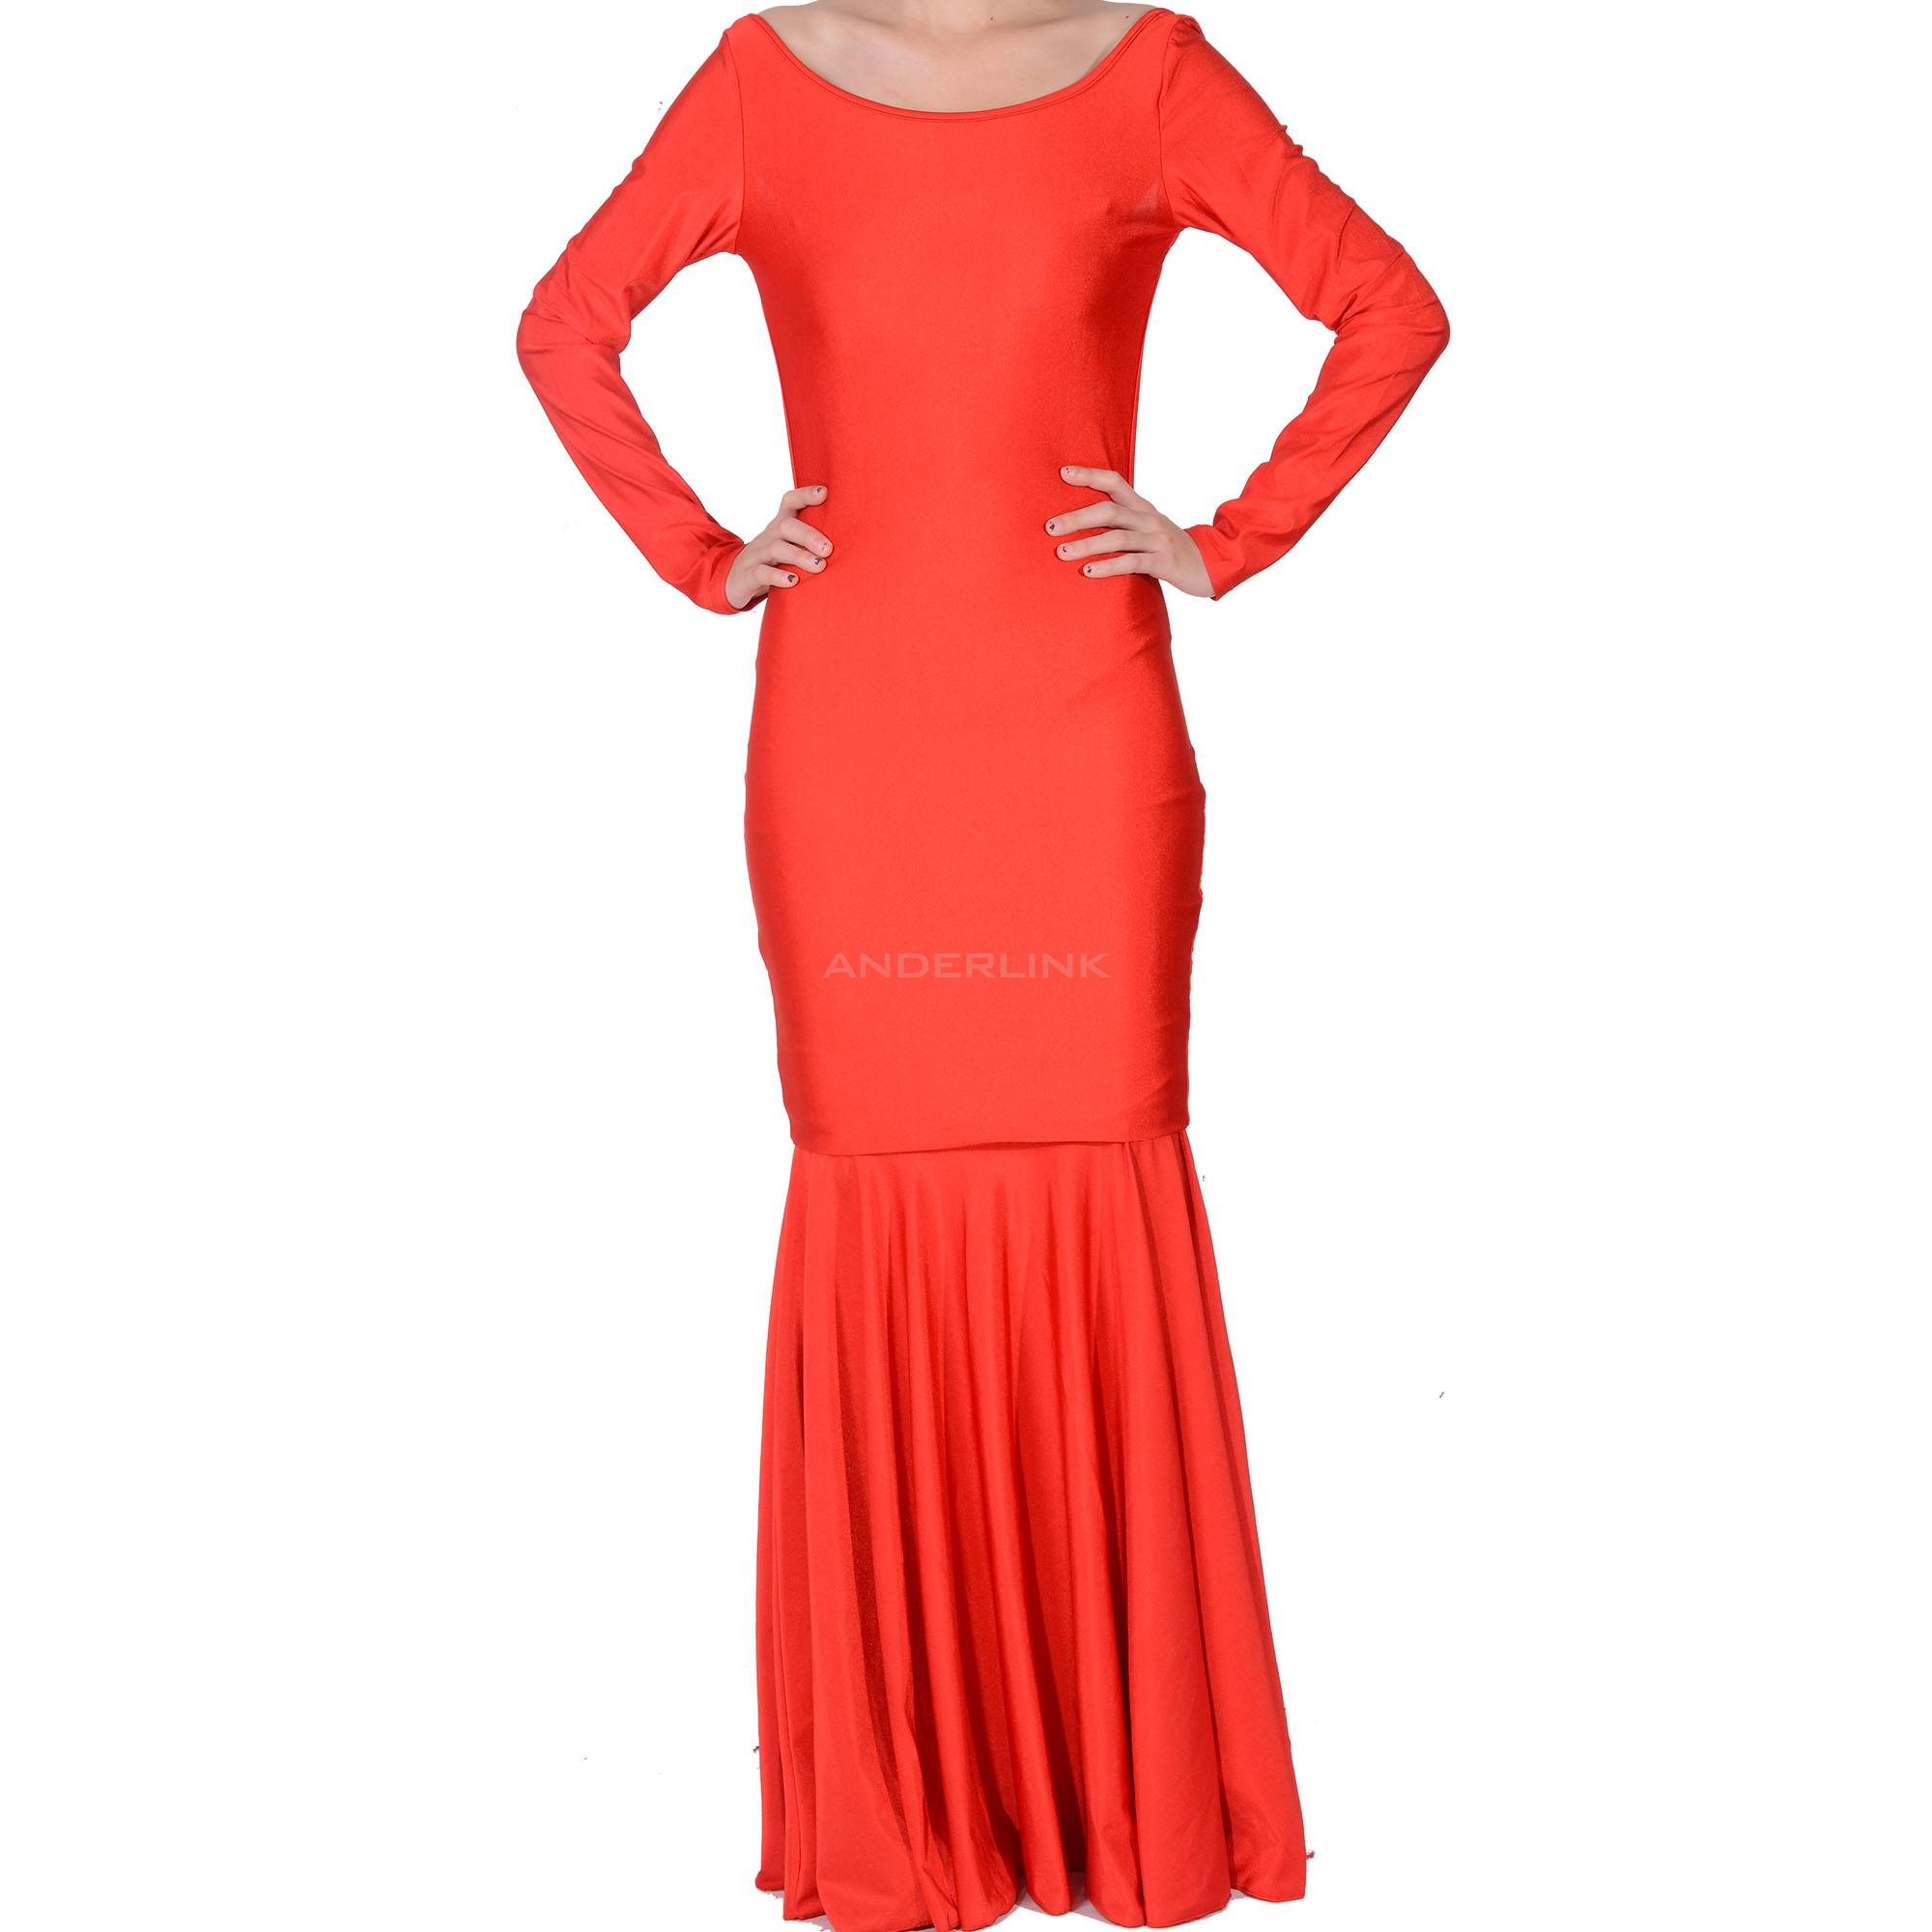 unknown Women's New Celeb Style Maxi Dress Backless Party Evening Bodycon Ladies Long Dress